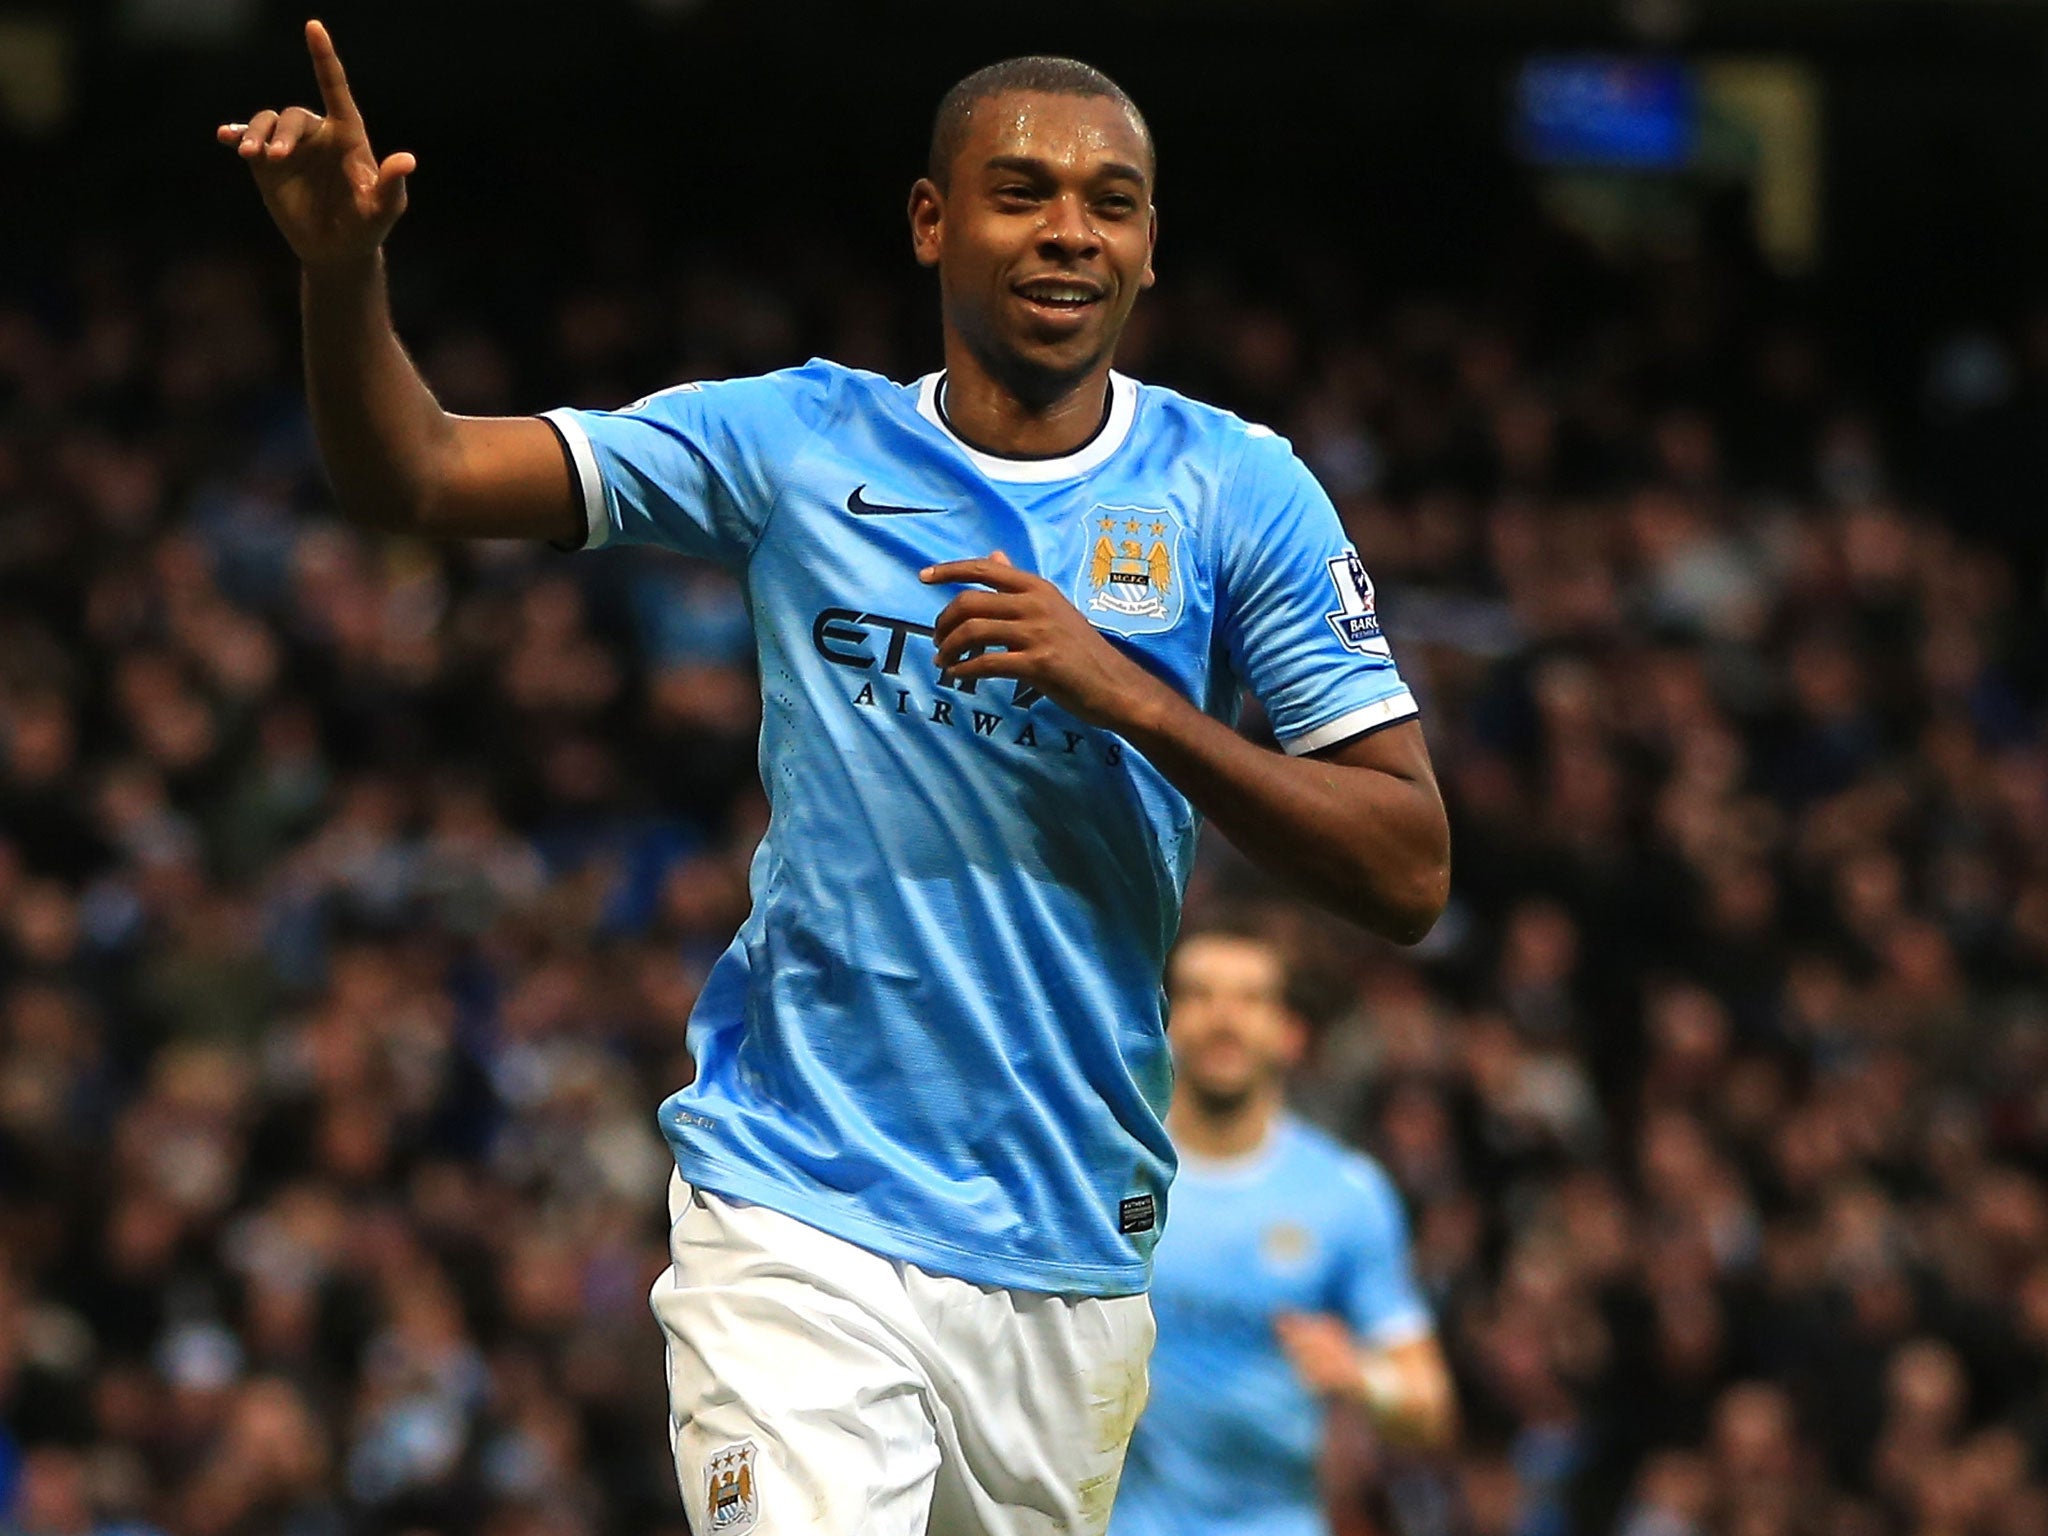 Fernandinho has settled in well at Manchester City, the Brazilian scoring twice in the 6-3 win over Arsenal in December